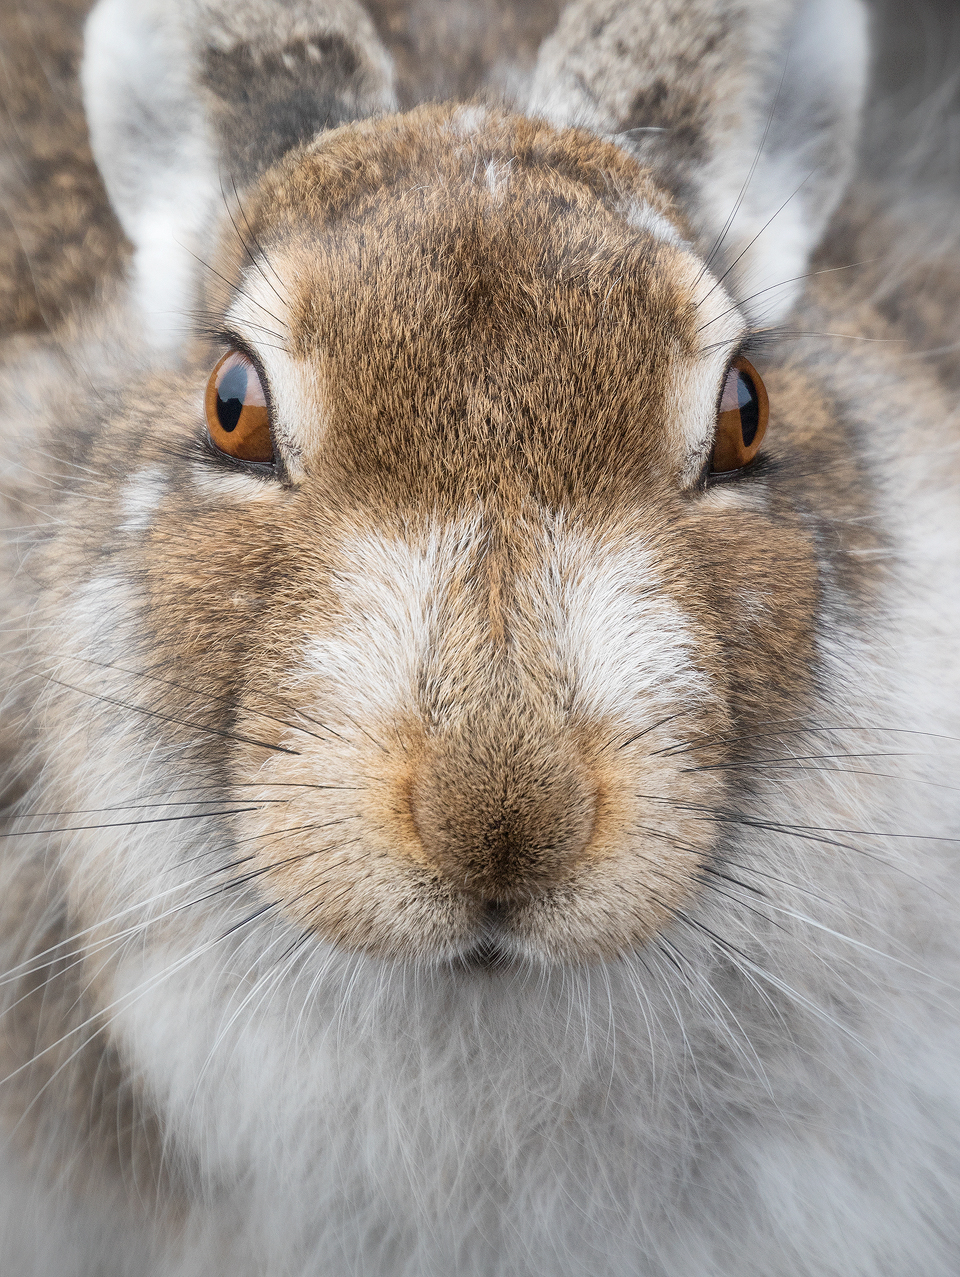 Mountain Hare Close up. After spending well over an hour gradually inching my way forward, I managed to build up a good level of trust with this hare until it became so comfortable with my presence it was happy for me to get close enough to completely fill the frame. Derbyshire, Peak District National Park. 